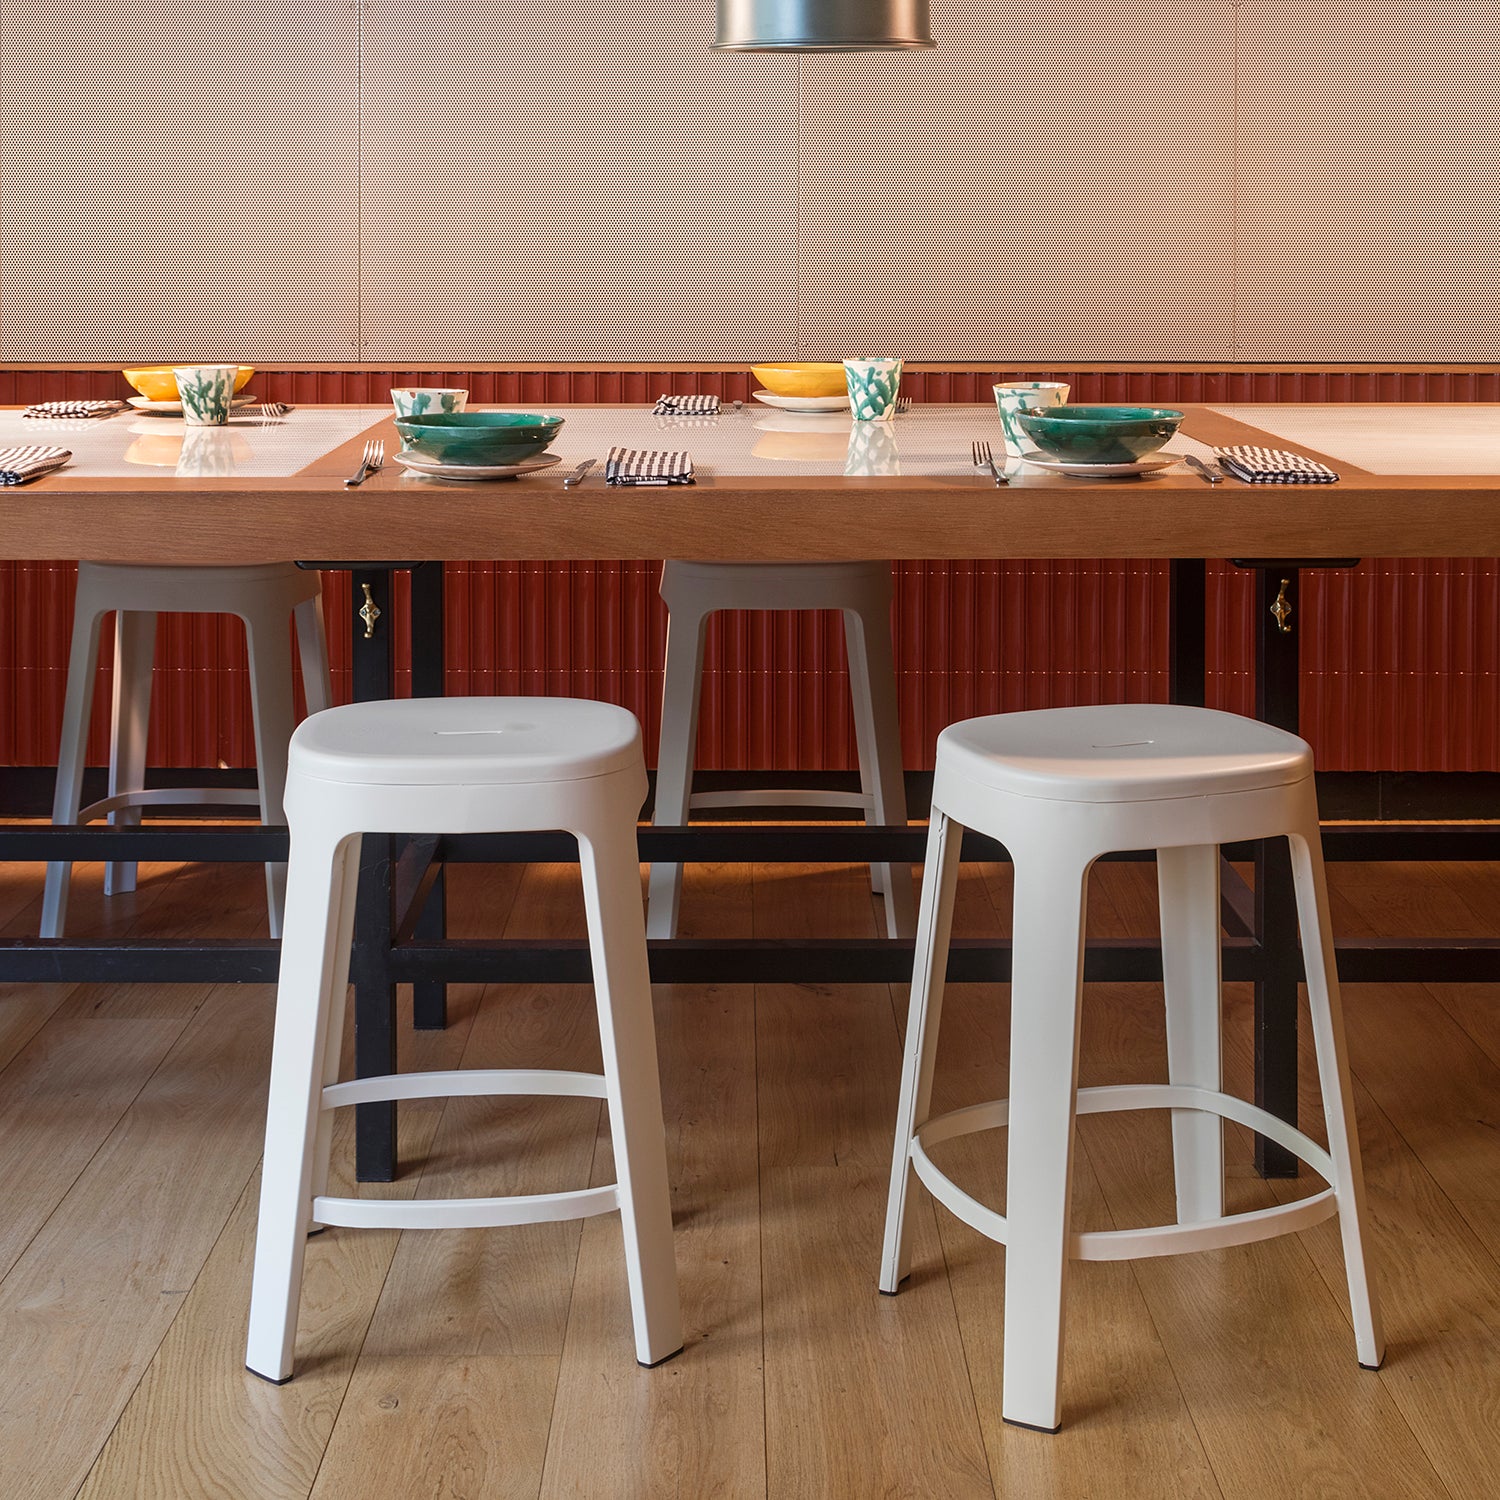 Ombra Bar + Counter Stool: Stacking